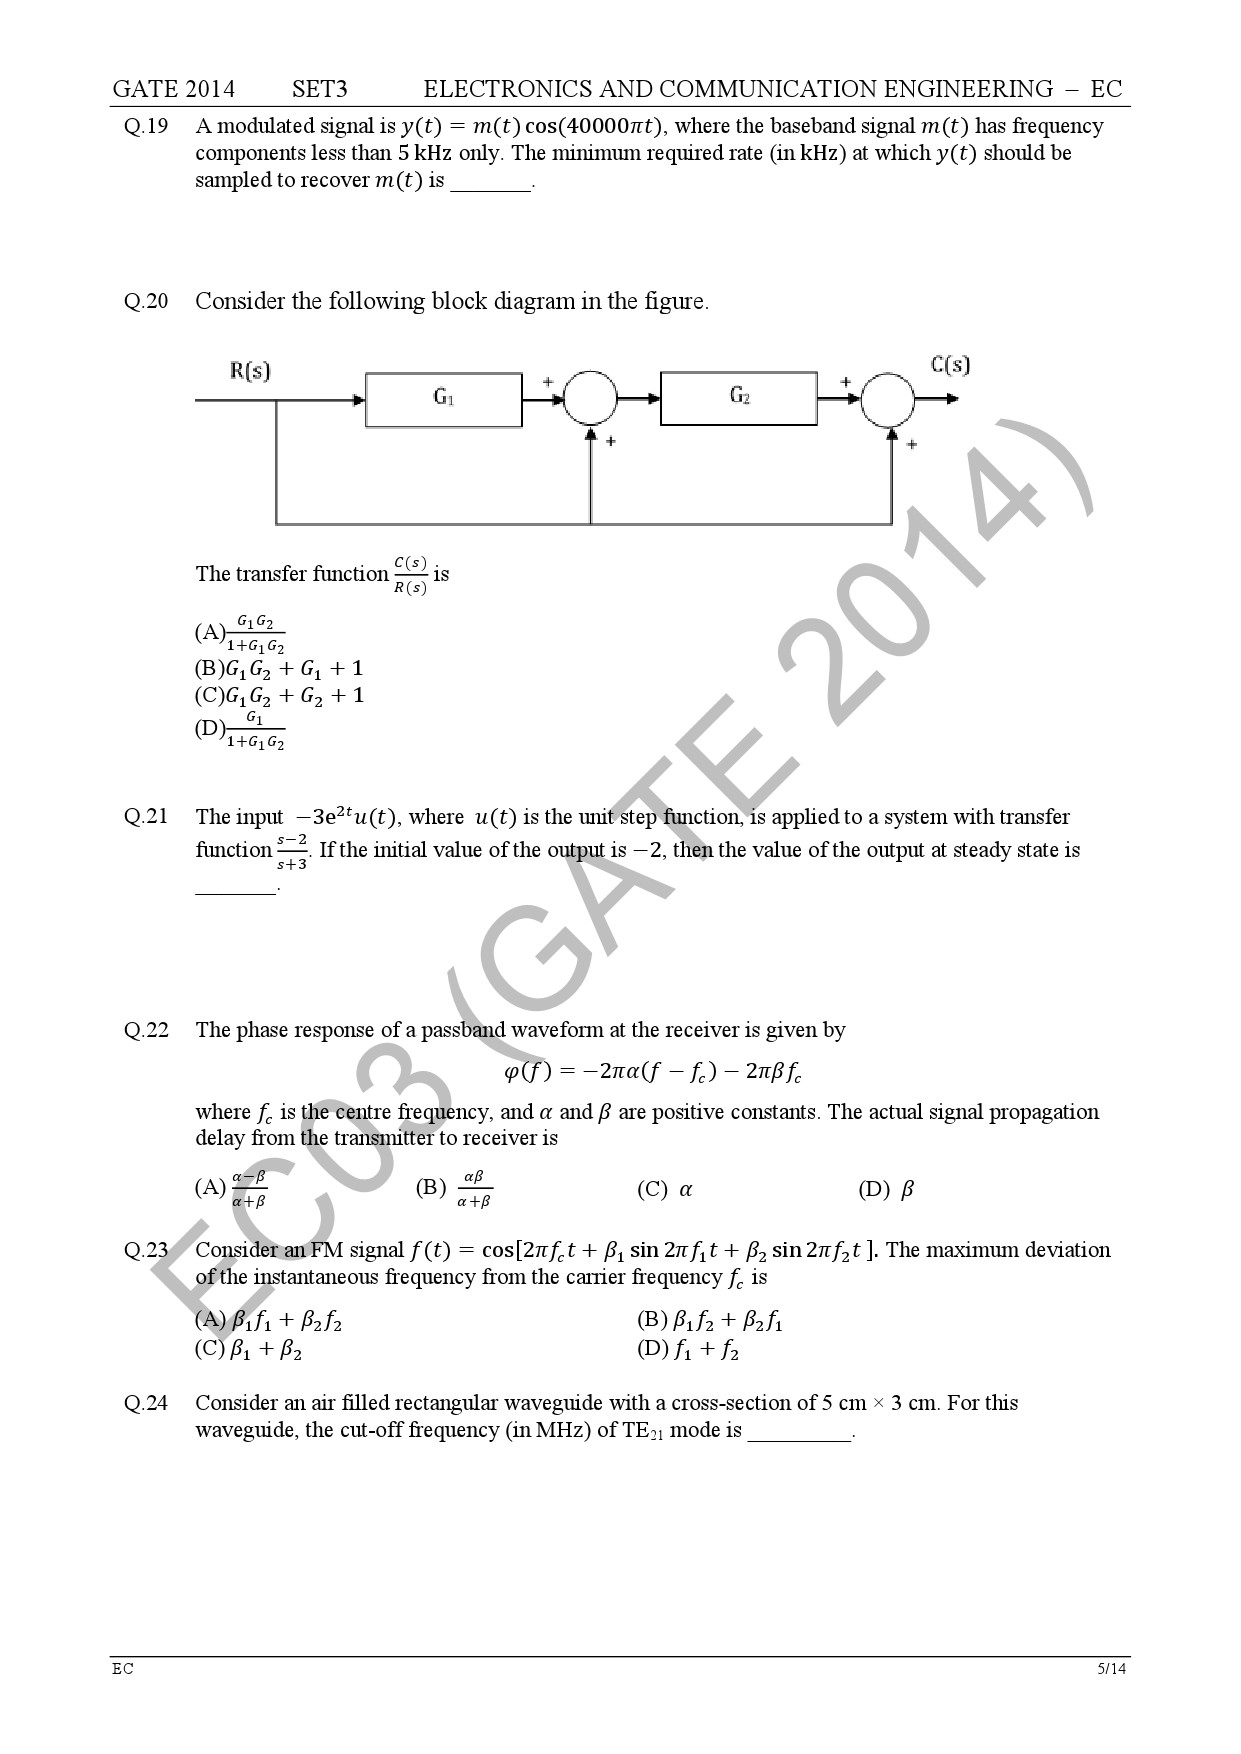 GATE Exam Question Paper 2014 Electronics and Communication Engineering Set 3 12